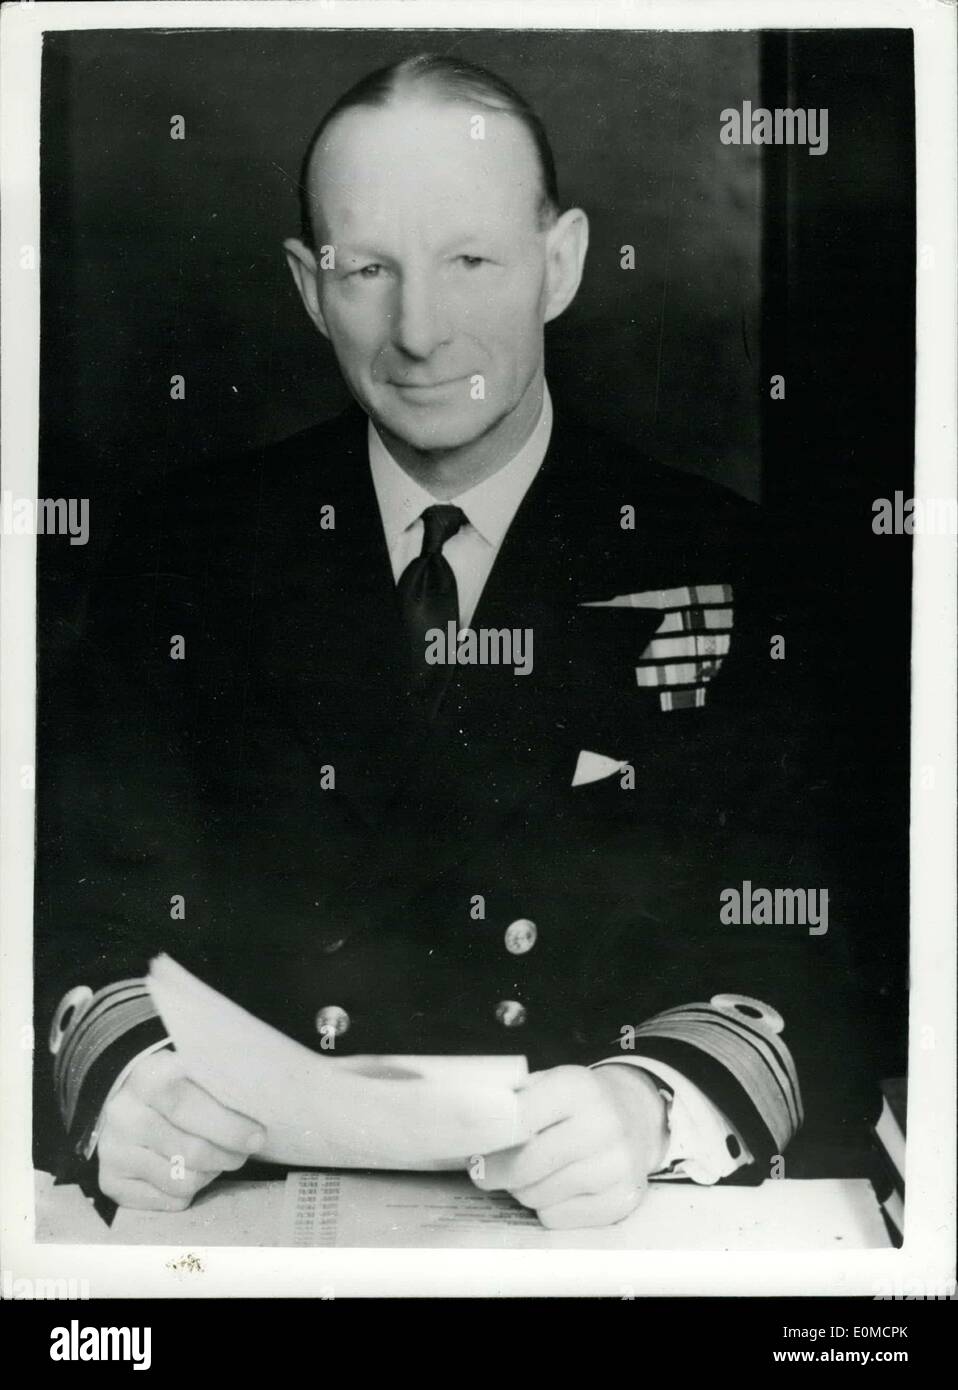 Sep. 06, 1954 - Admiral Sir Guy Grantham K.C.B. To Succeed Admiral Earl Mountbatten - commander In Chief Mediterranean: It has been announced that Admiral Sir Guy Granthan K.C.B., C.B.E. D.S.O., D.S.C., is to succeed Admiral the Earl Mountabatten of Burma, as commander in chief Mediterranean station, and commander in chief allied forces, Mediterranean. Photo shows Admiral Sir Guy Grantham K.C.B., C.B.E.., D.S.O., D.S.C. Stock Photo